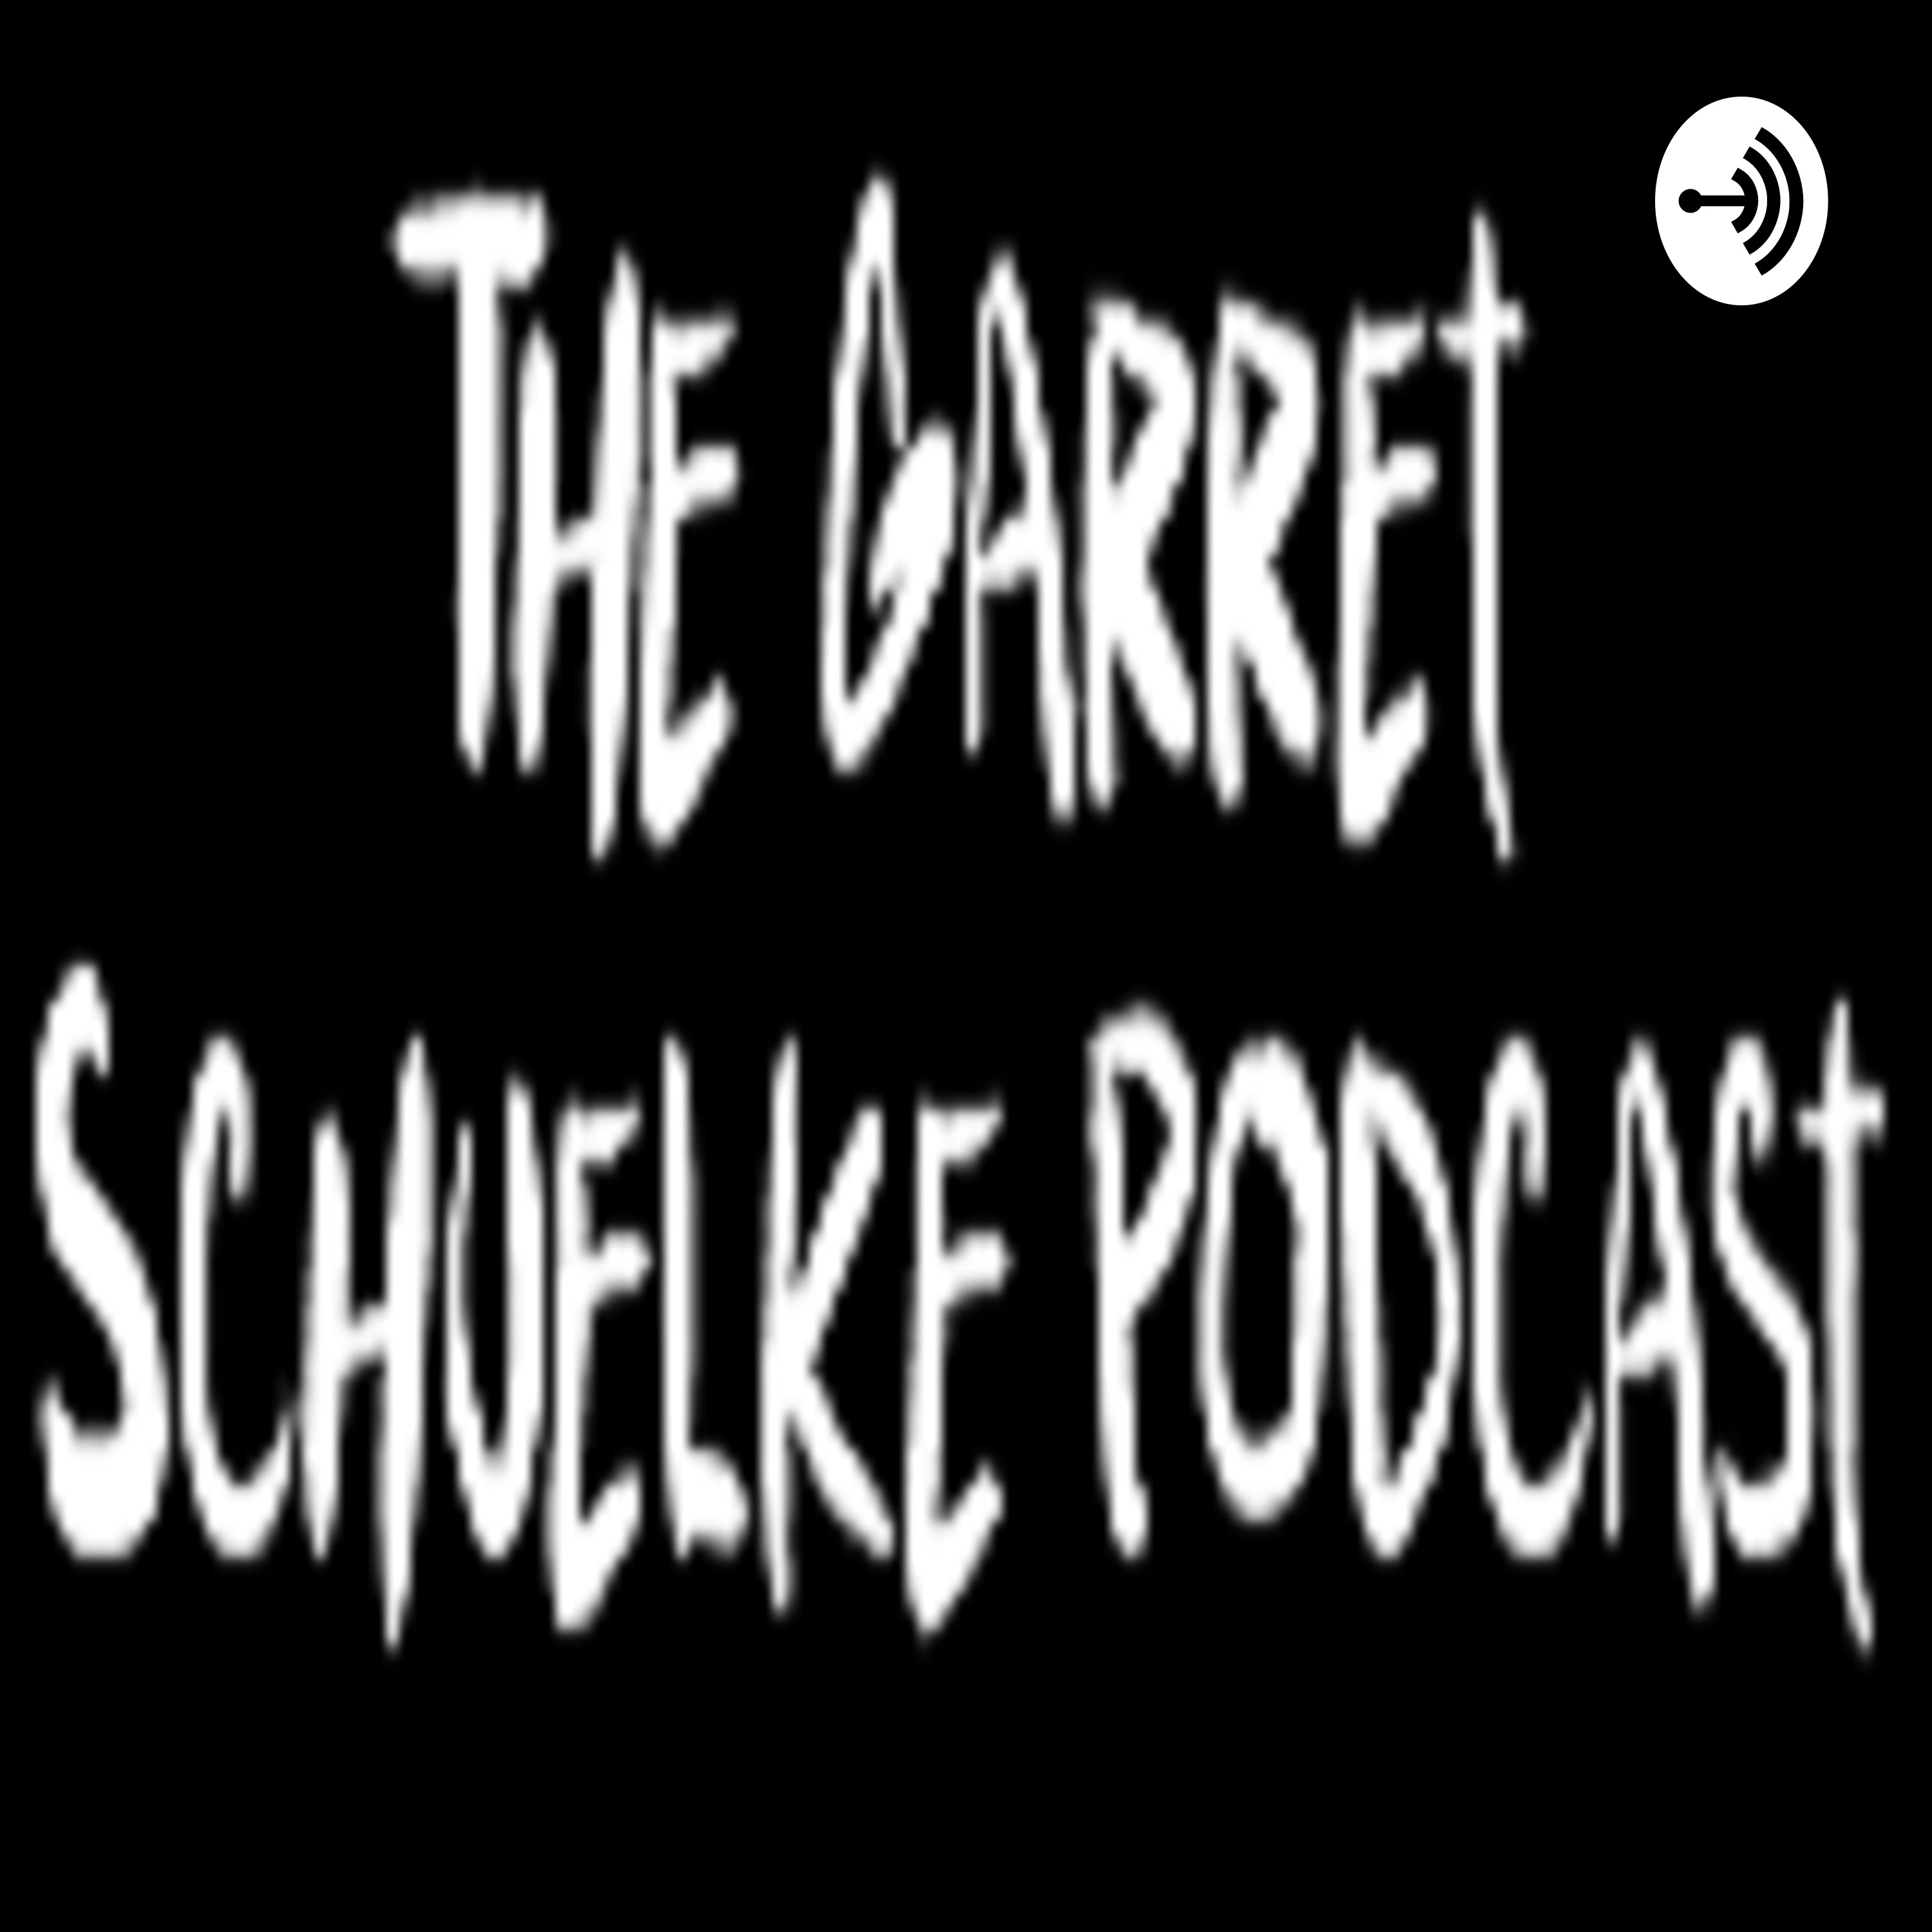 The Garret Schuelke Podcast Episode 37: Writing Our Own Masterpieces with Dan Denton